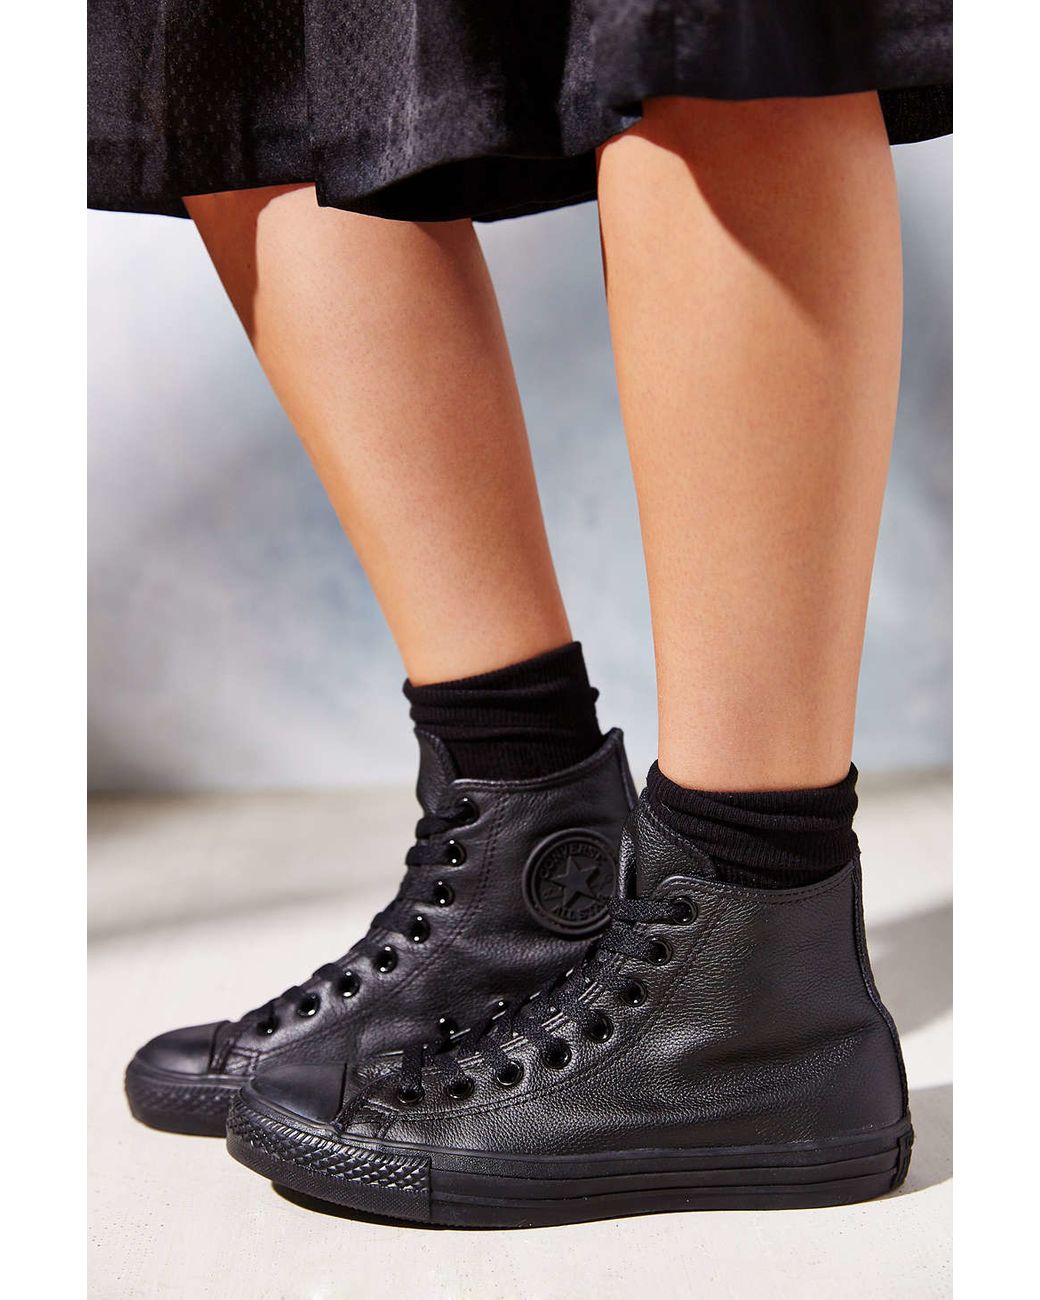 Converse Chuck Taylor All Star Leather High Top Sneaker in Black | Lyst  Canada